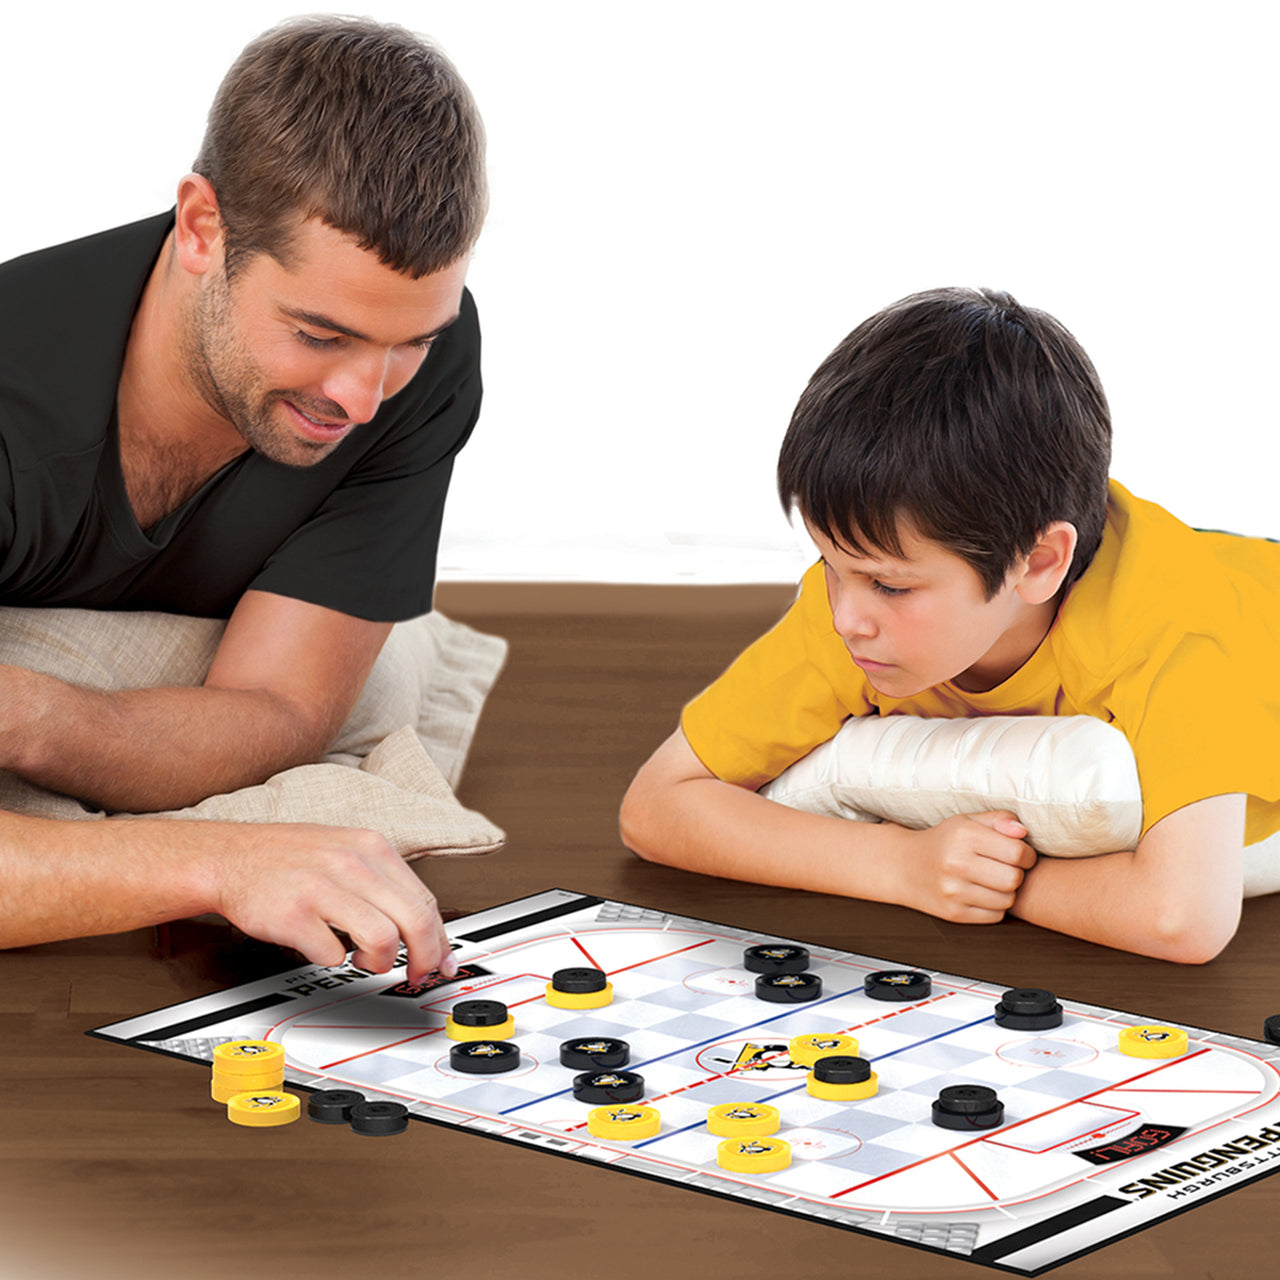 Pittsburgh Penguins Checkers Board Game by Masterpieces